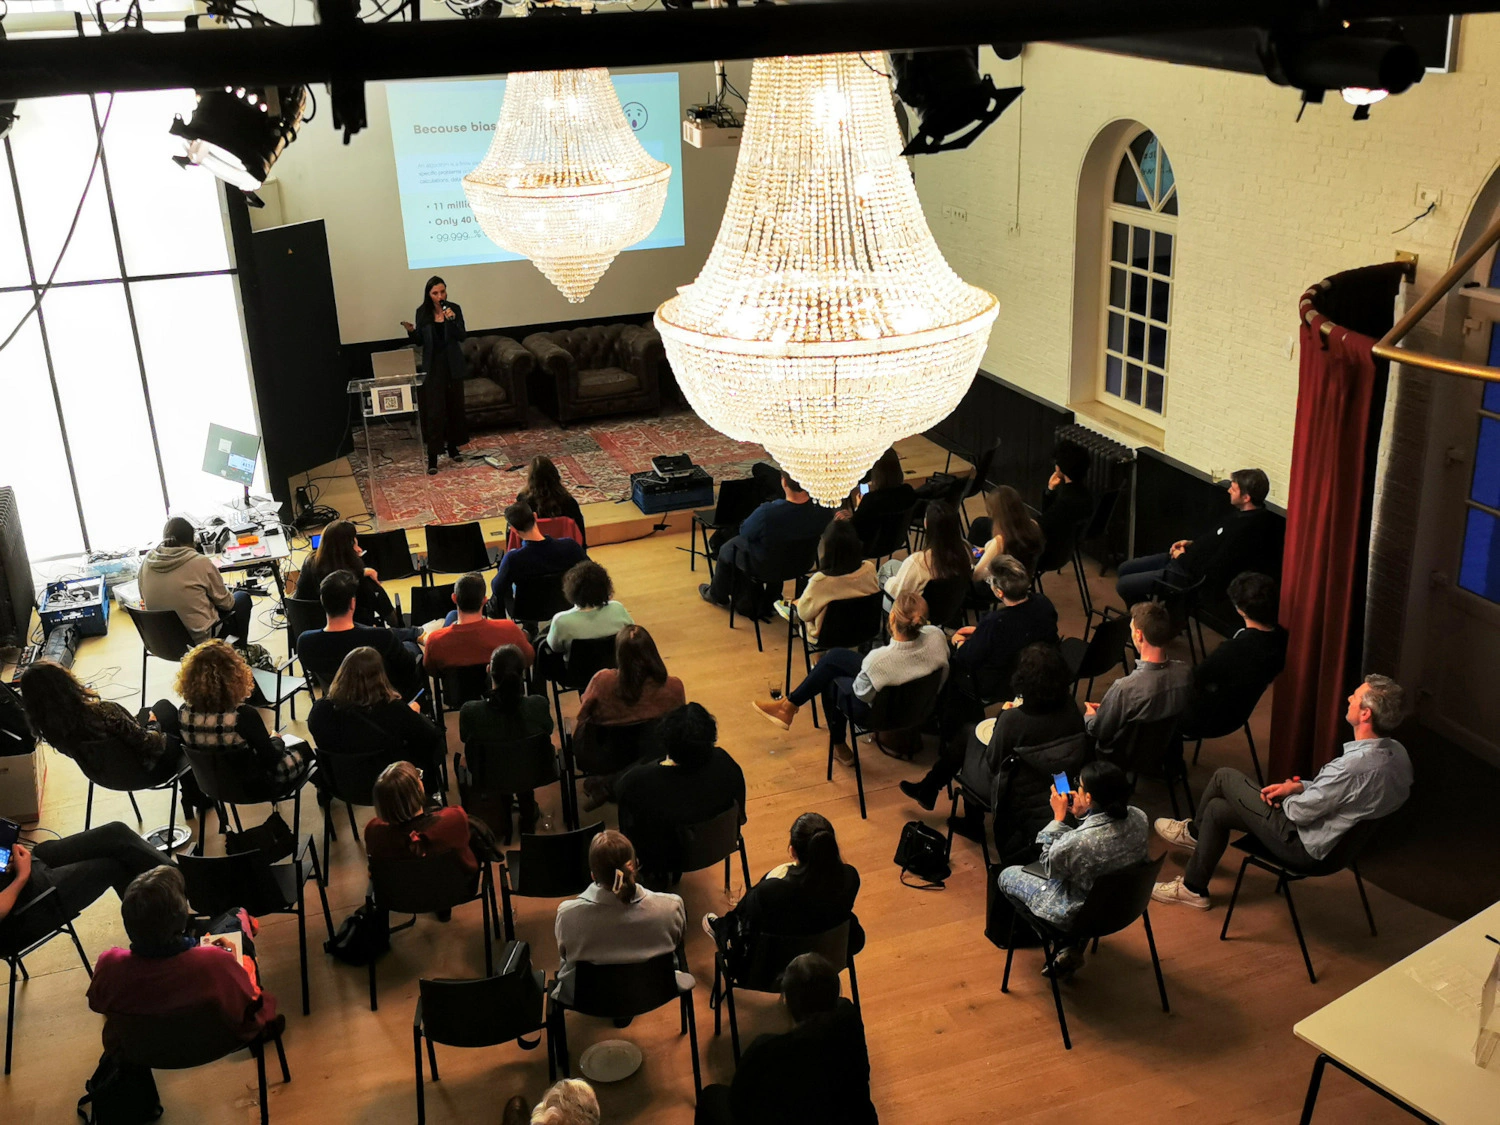 A picture showing the event 'Breaking the Silos: Inclusion in Tech' taking place.